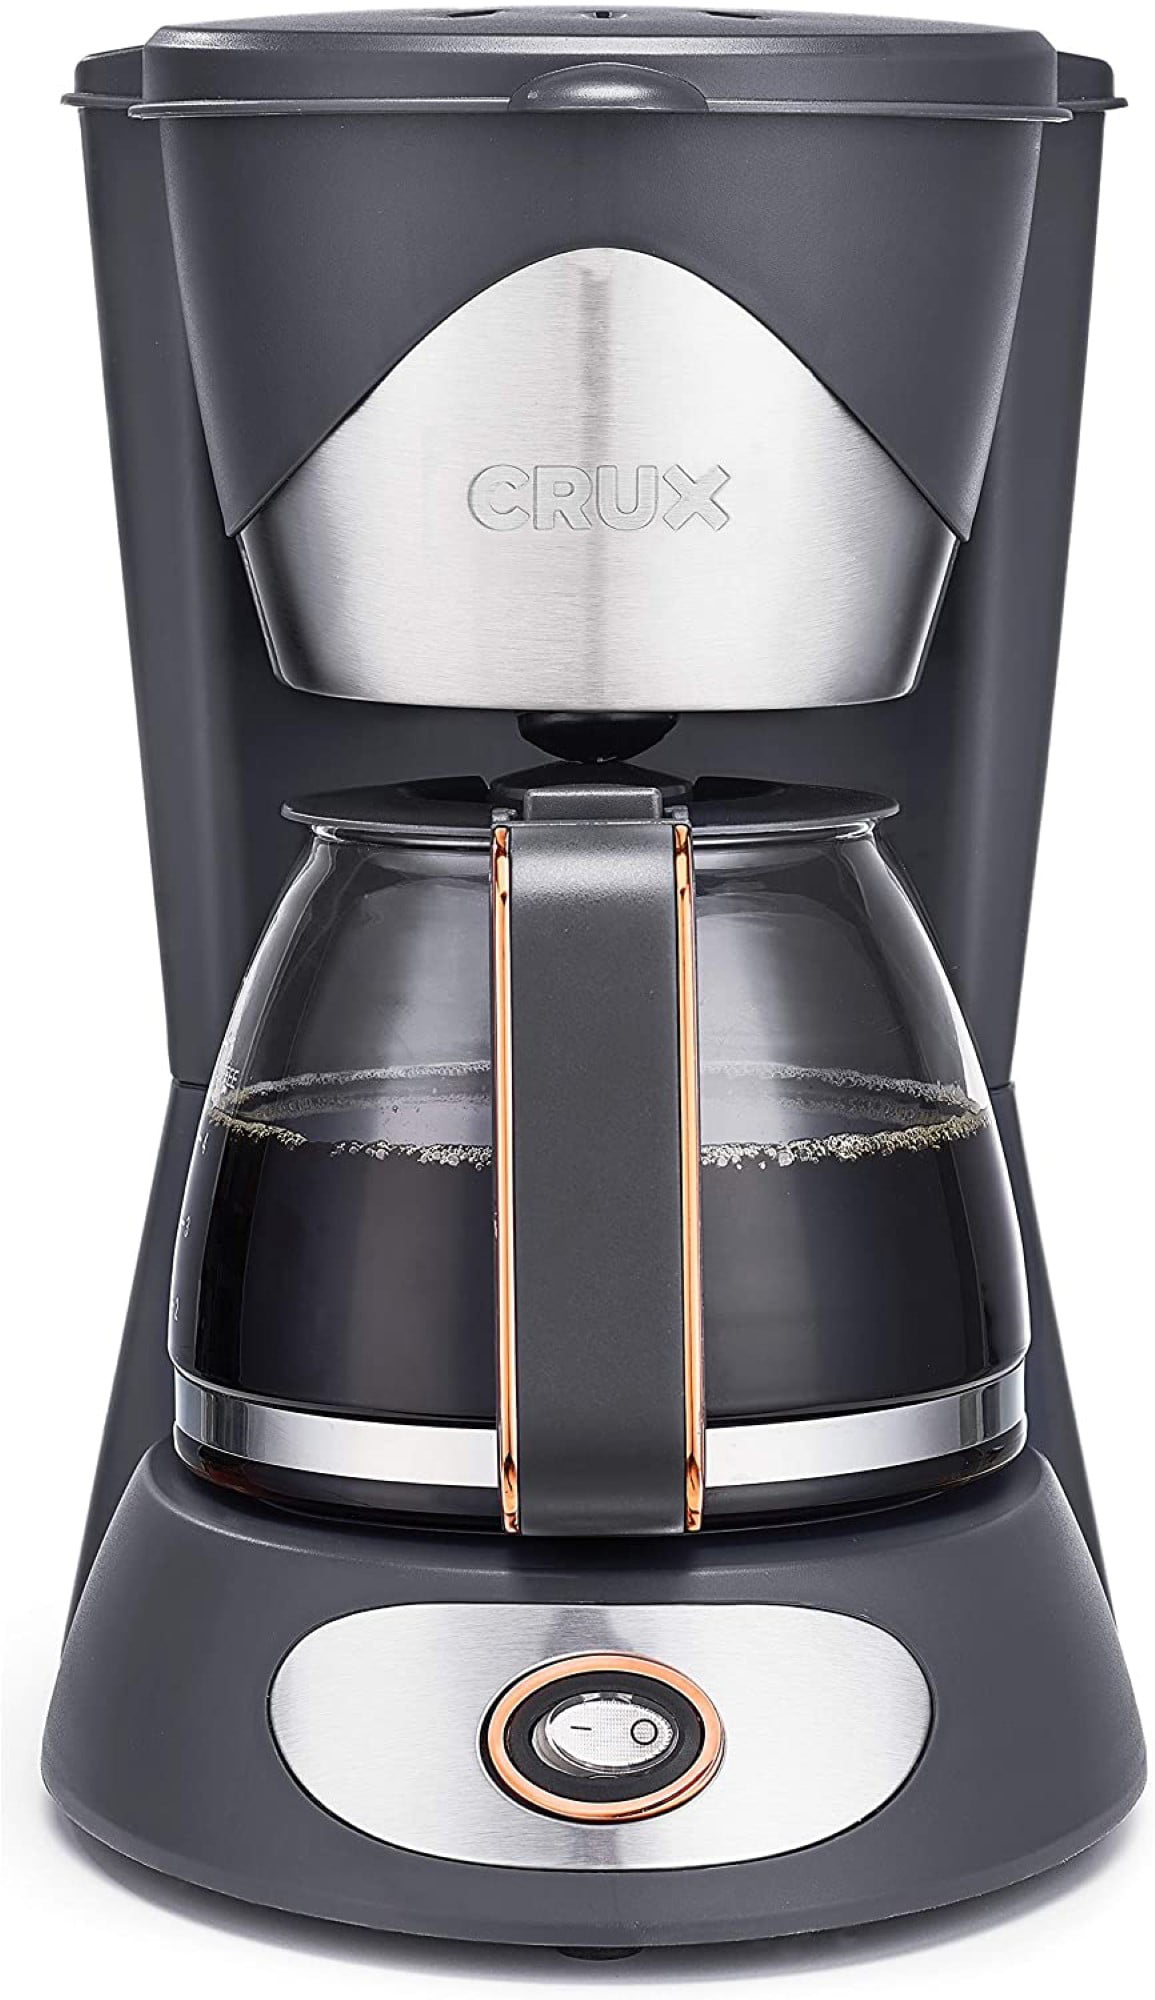 Crux 14634-SN 5 Cup Sustainable Manual Coffee Maker Pot With